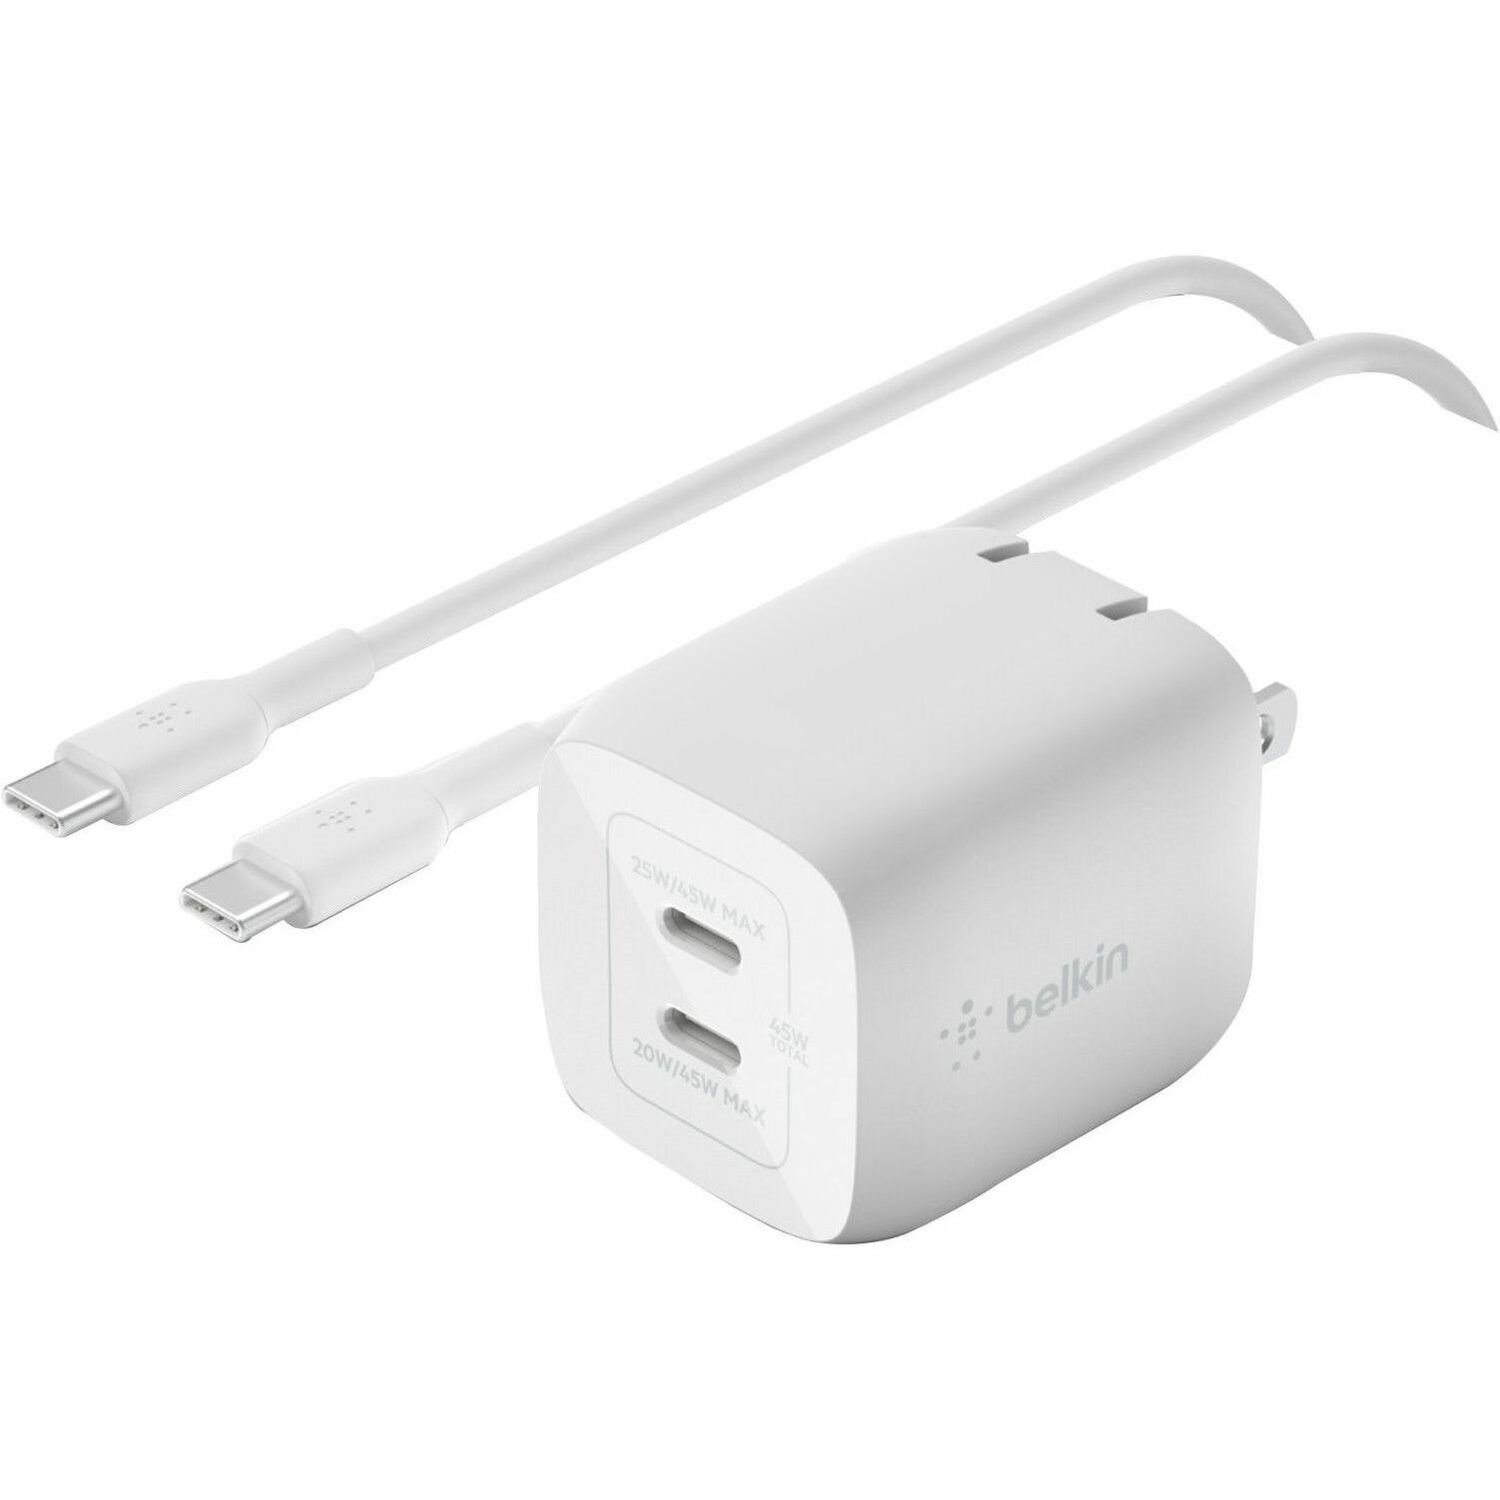 Belkin 45W Portable Dual Port GaN Wall Charger - 2xUSB-C (45W Total) - w/ USB-C to USB-C Cable - Fast Charging - Power Adapter - White